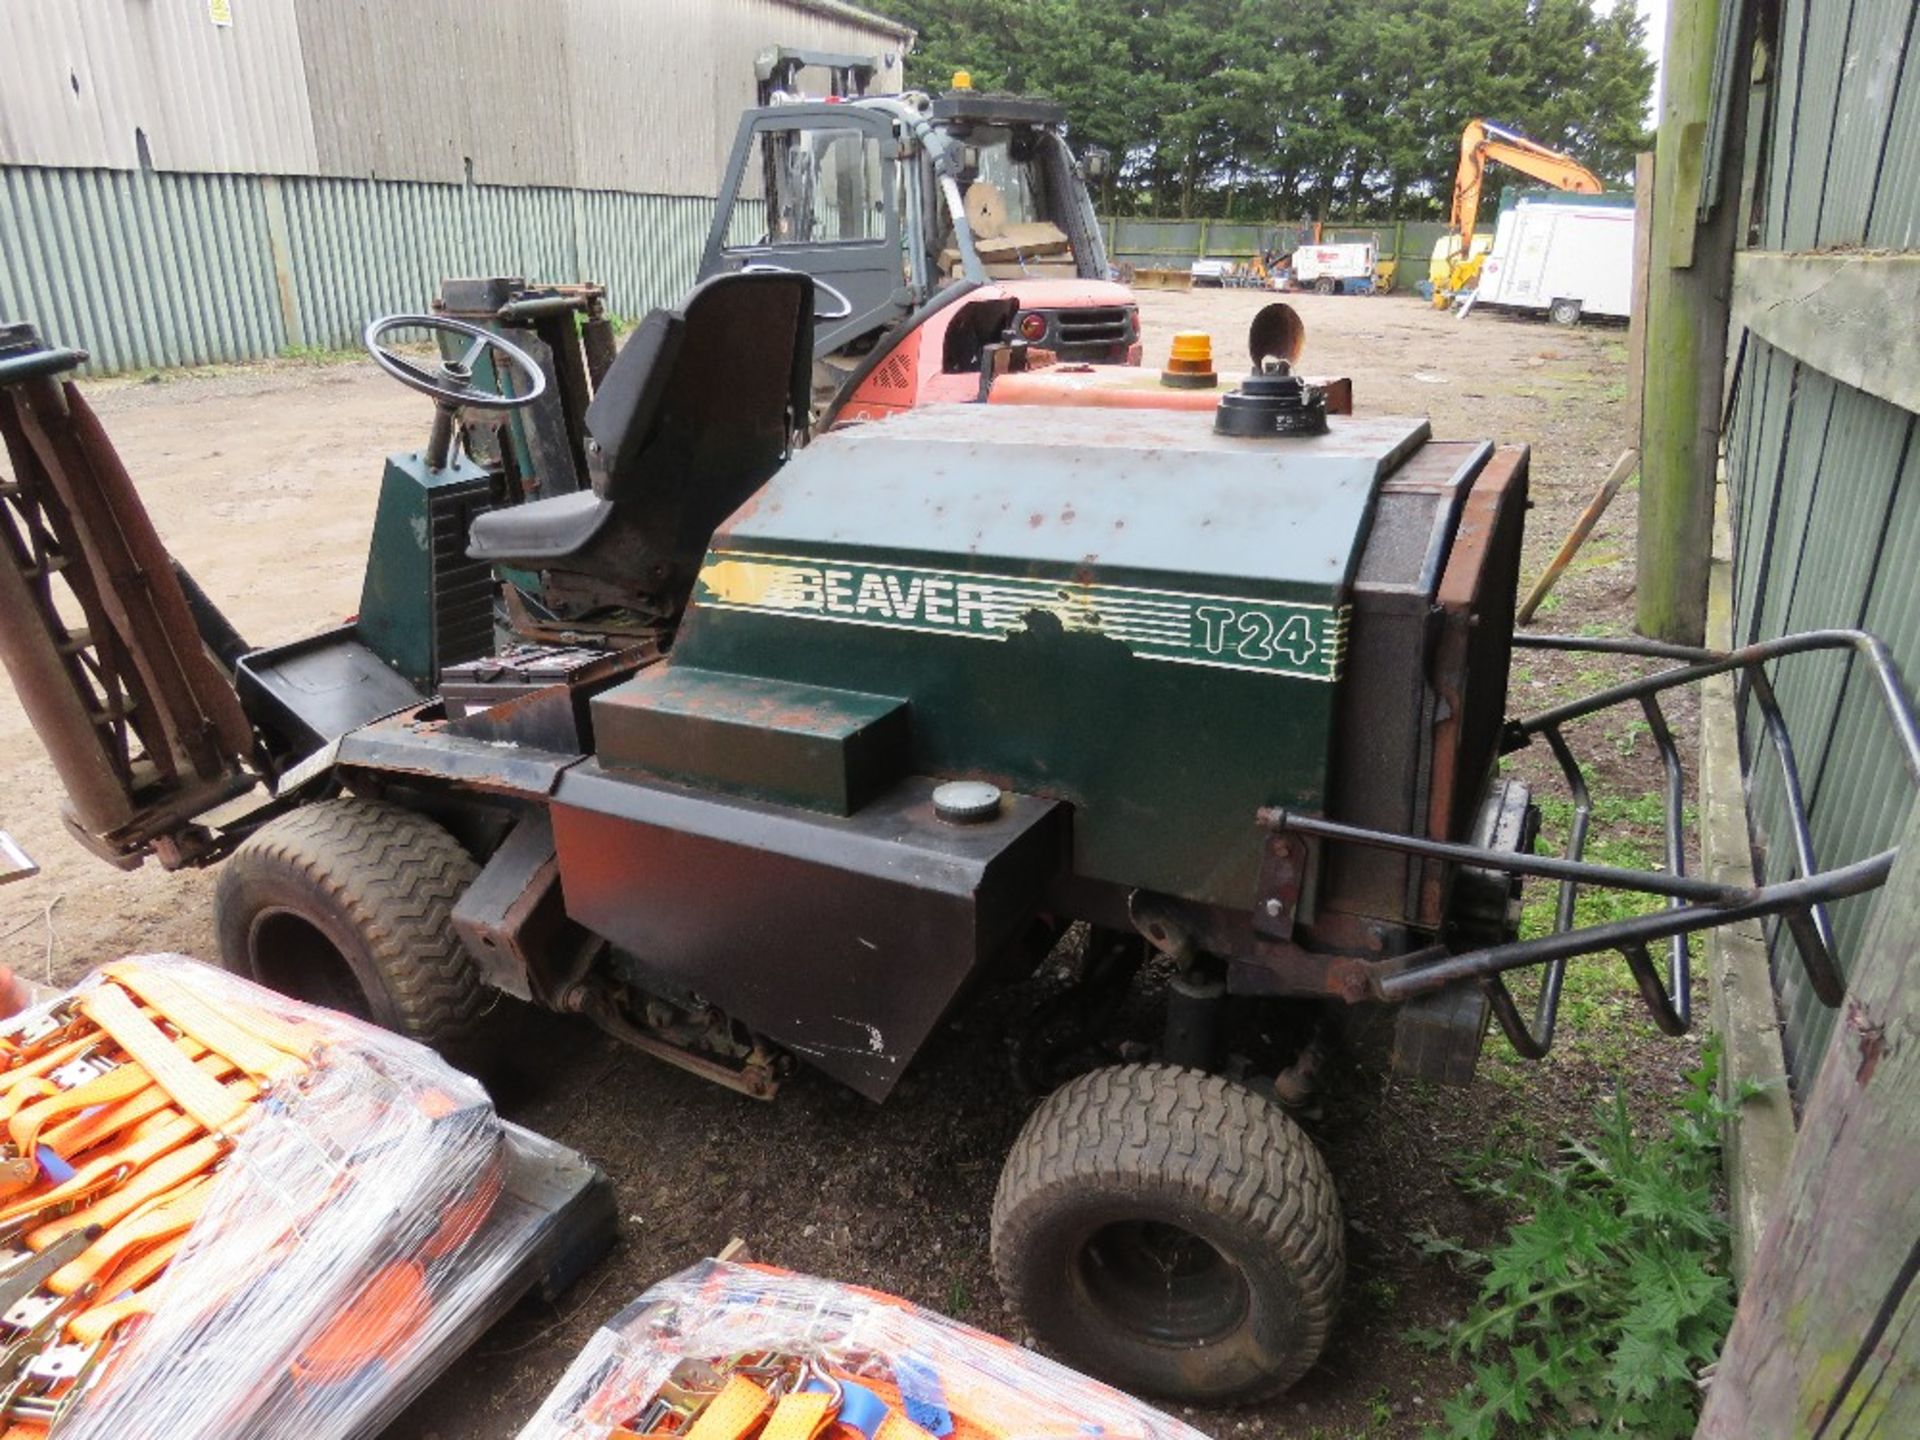 BEAVER T24 4WD RIDE ON TRIPLE MOWER. WHEN TESTED WAS SEEN TO RUN, DRIVE AND MOWERS ENGAED (ONE CUTTE - Image 9 of 9